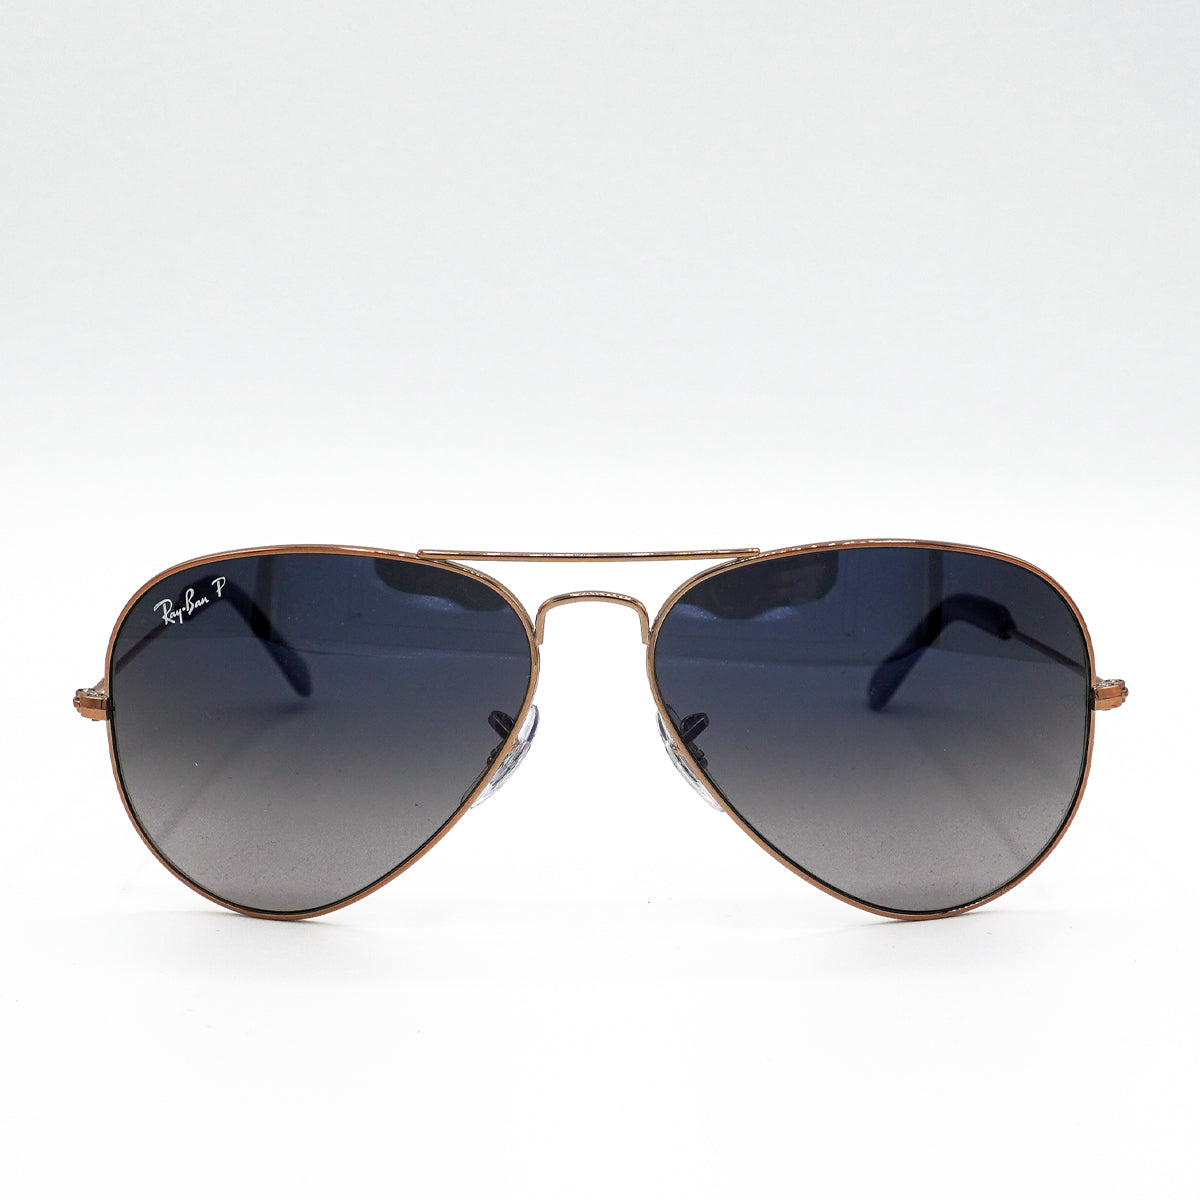 Ray-Ban Large Aviator Polarised Sunglasses 0RB3025 - Blue gradient, copper frame